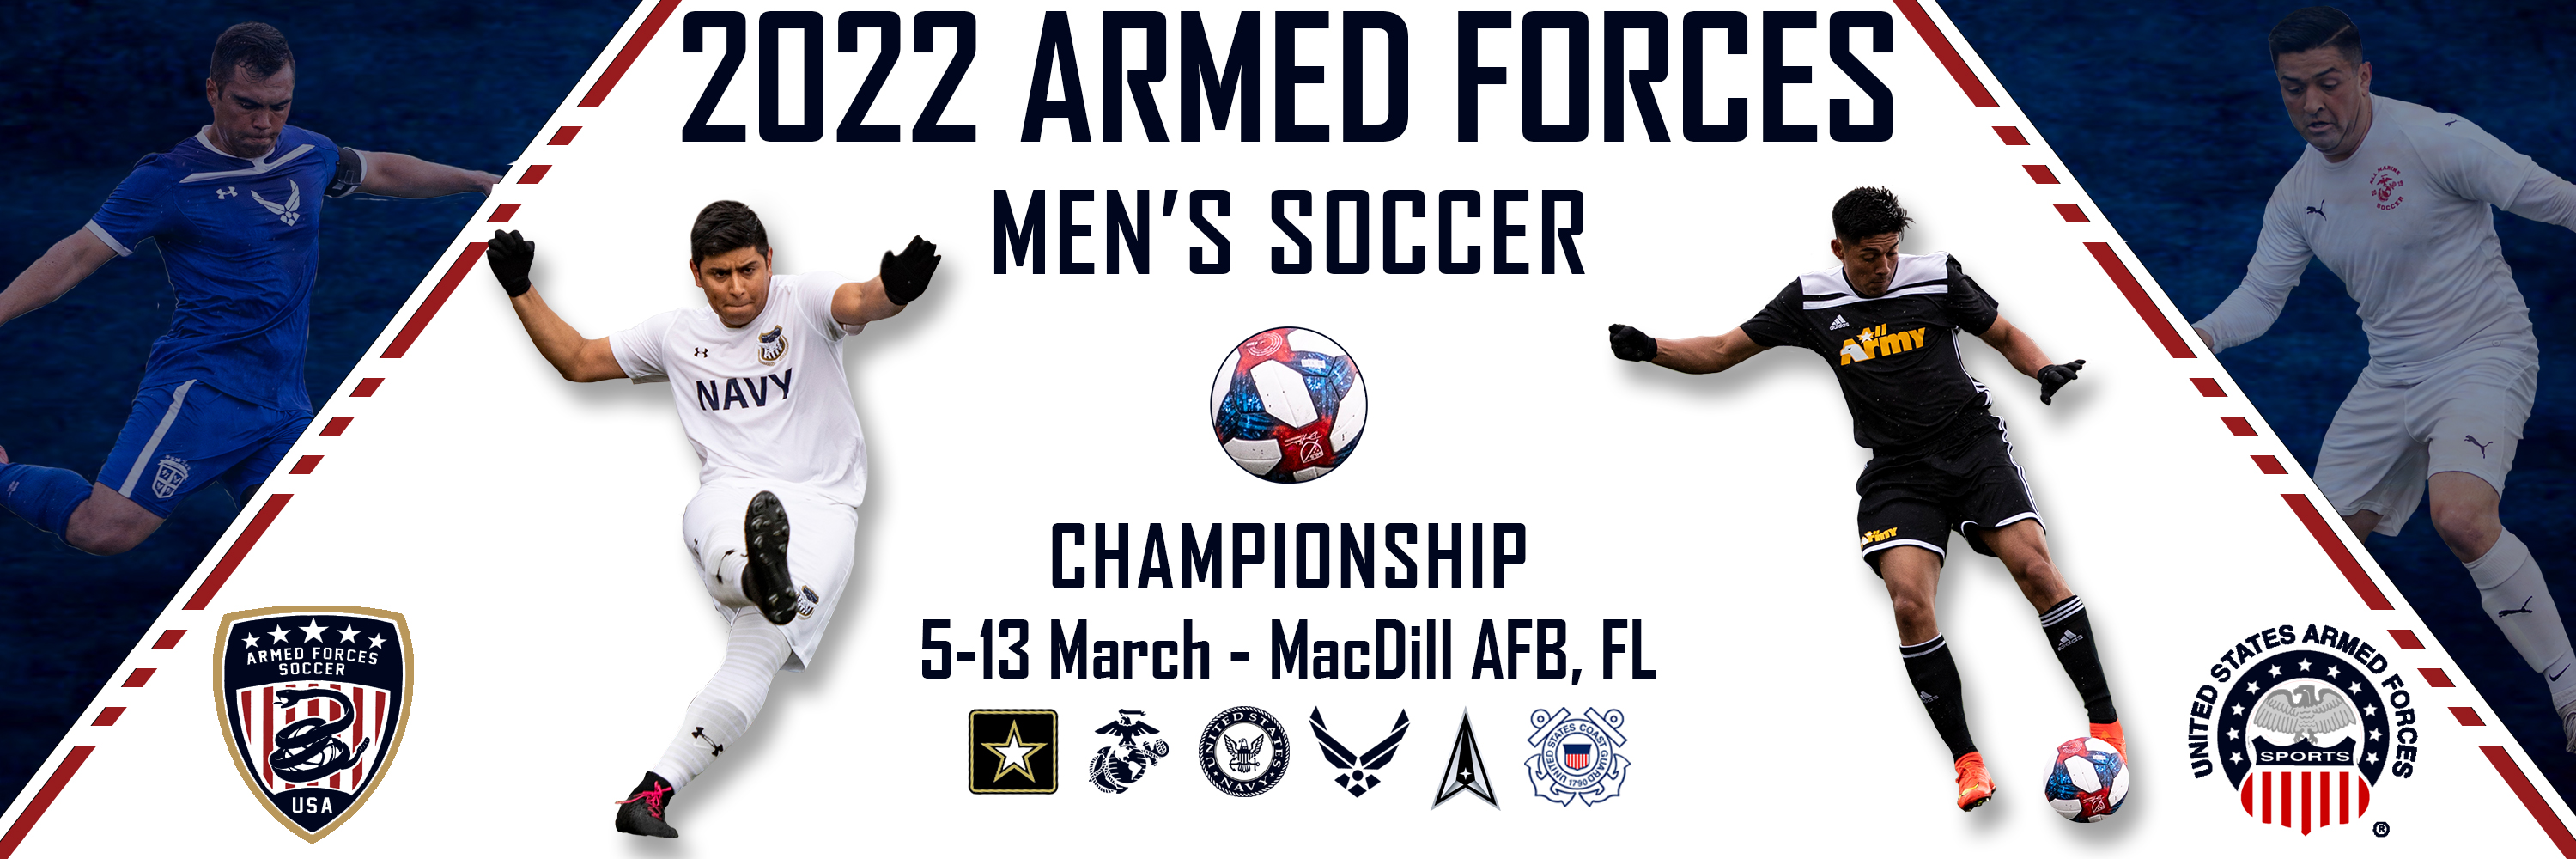 Armed Forces Sports > Sports > Soccer > Schedule